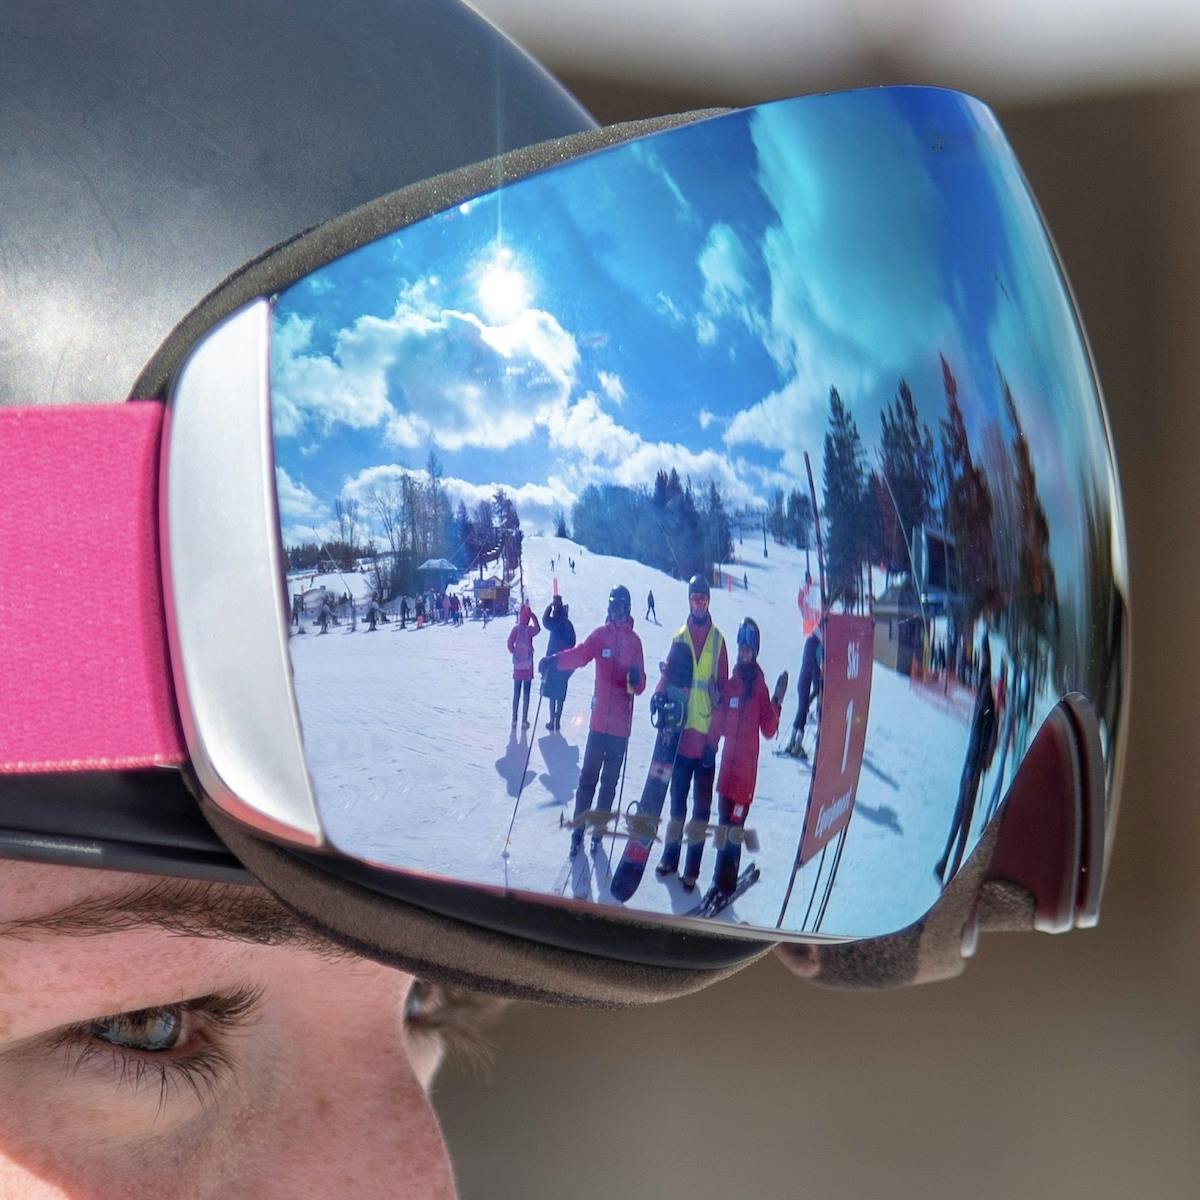 Reflection of happy skiers in a rider's goggles on a bright sunny day